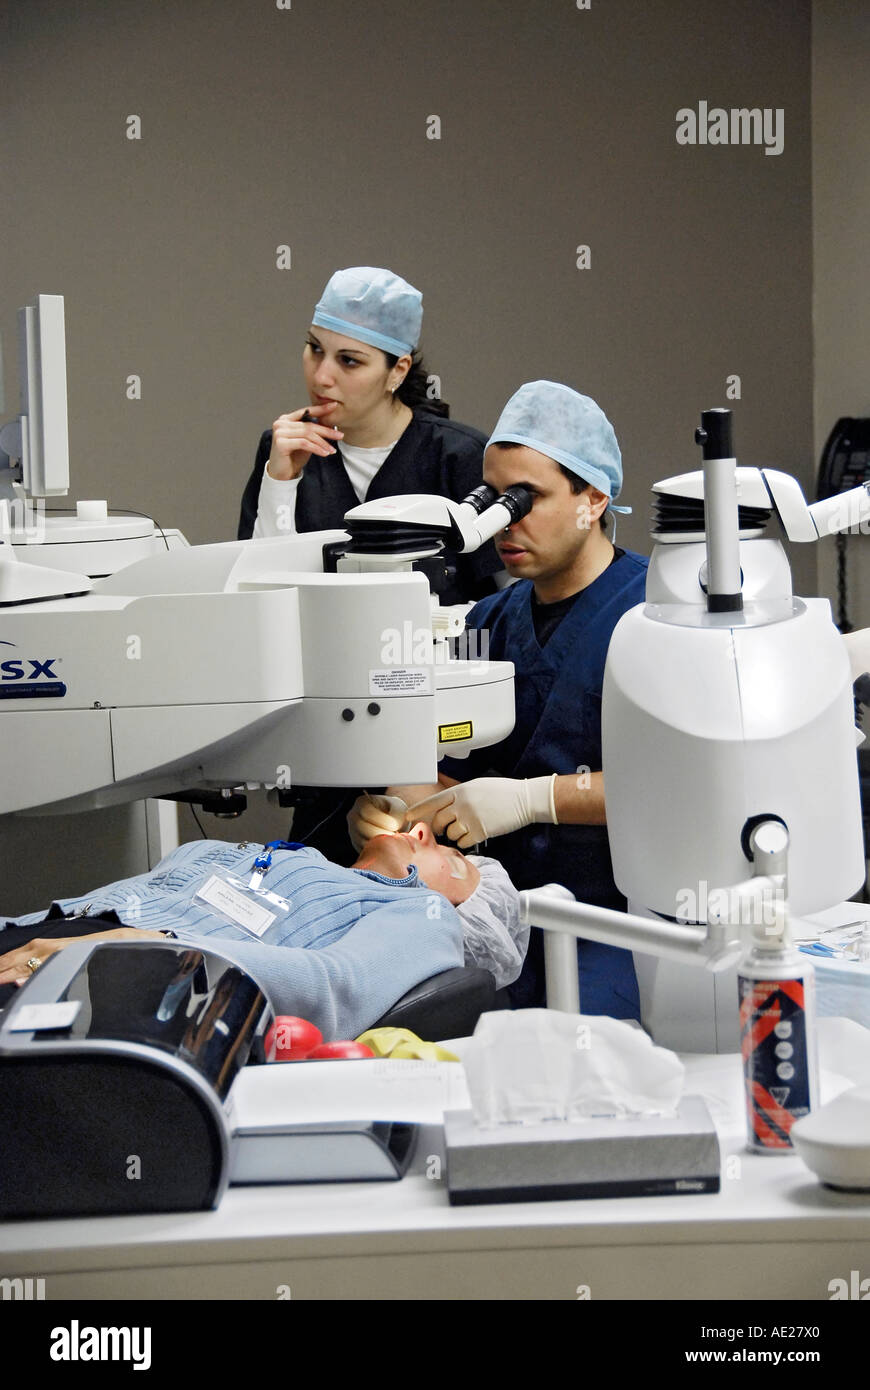 PRK and Lasik laser eye surgery is state of the art vision correction and surgical operation is performed at a laser eye center Stock Photo